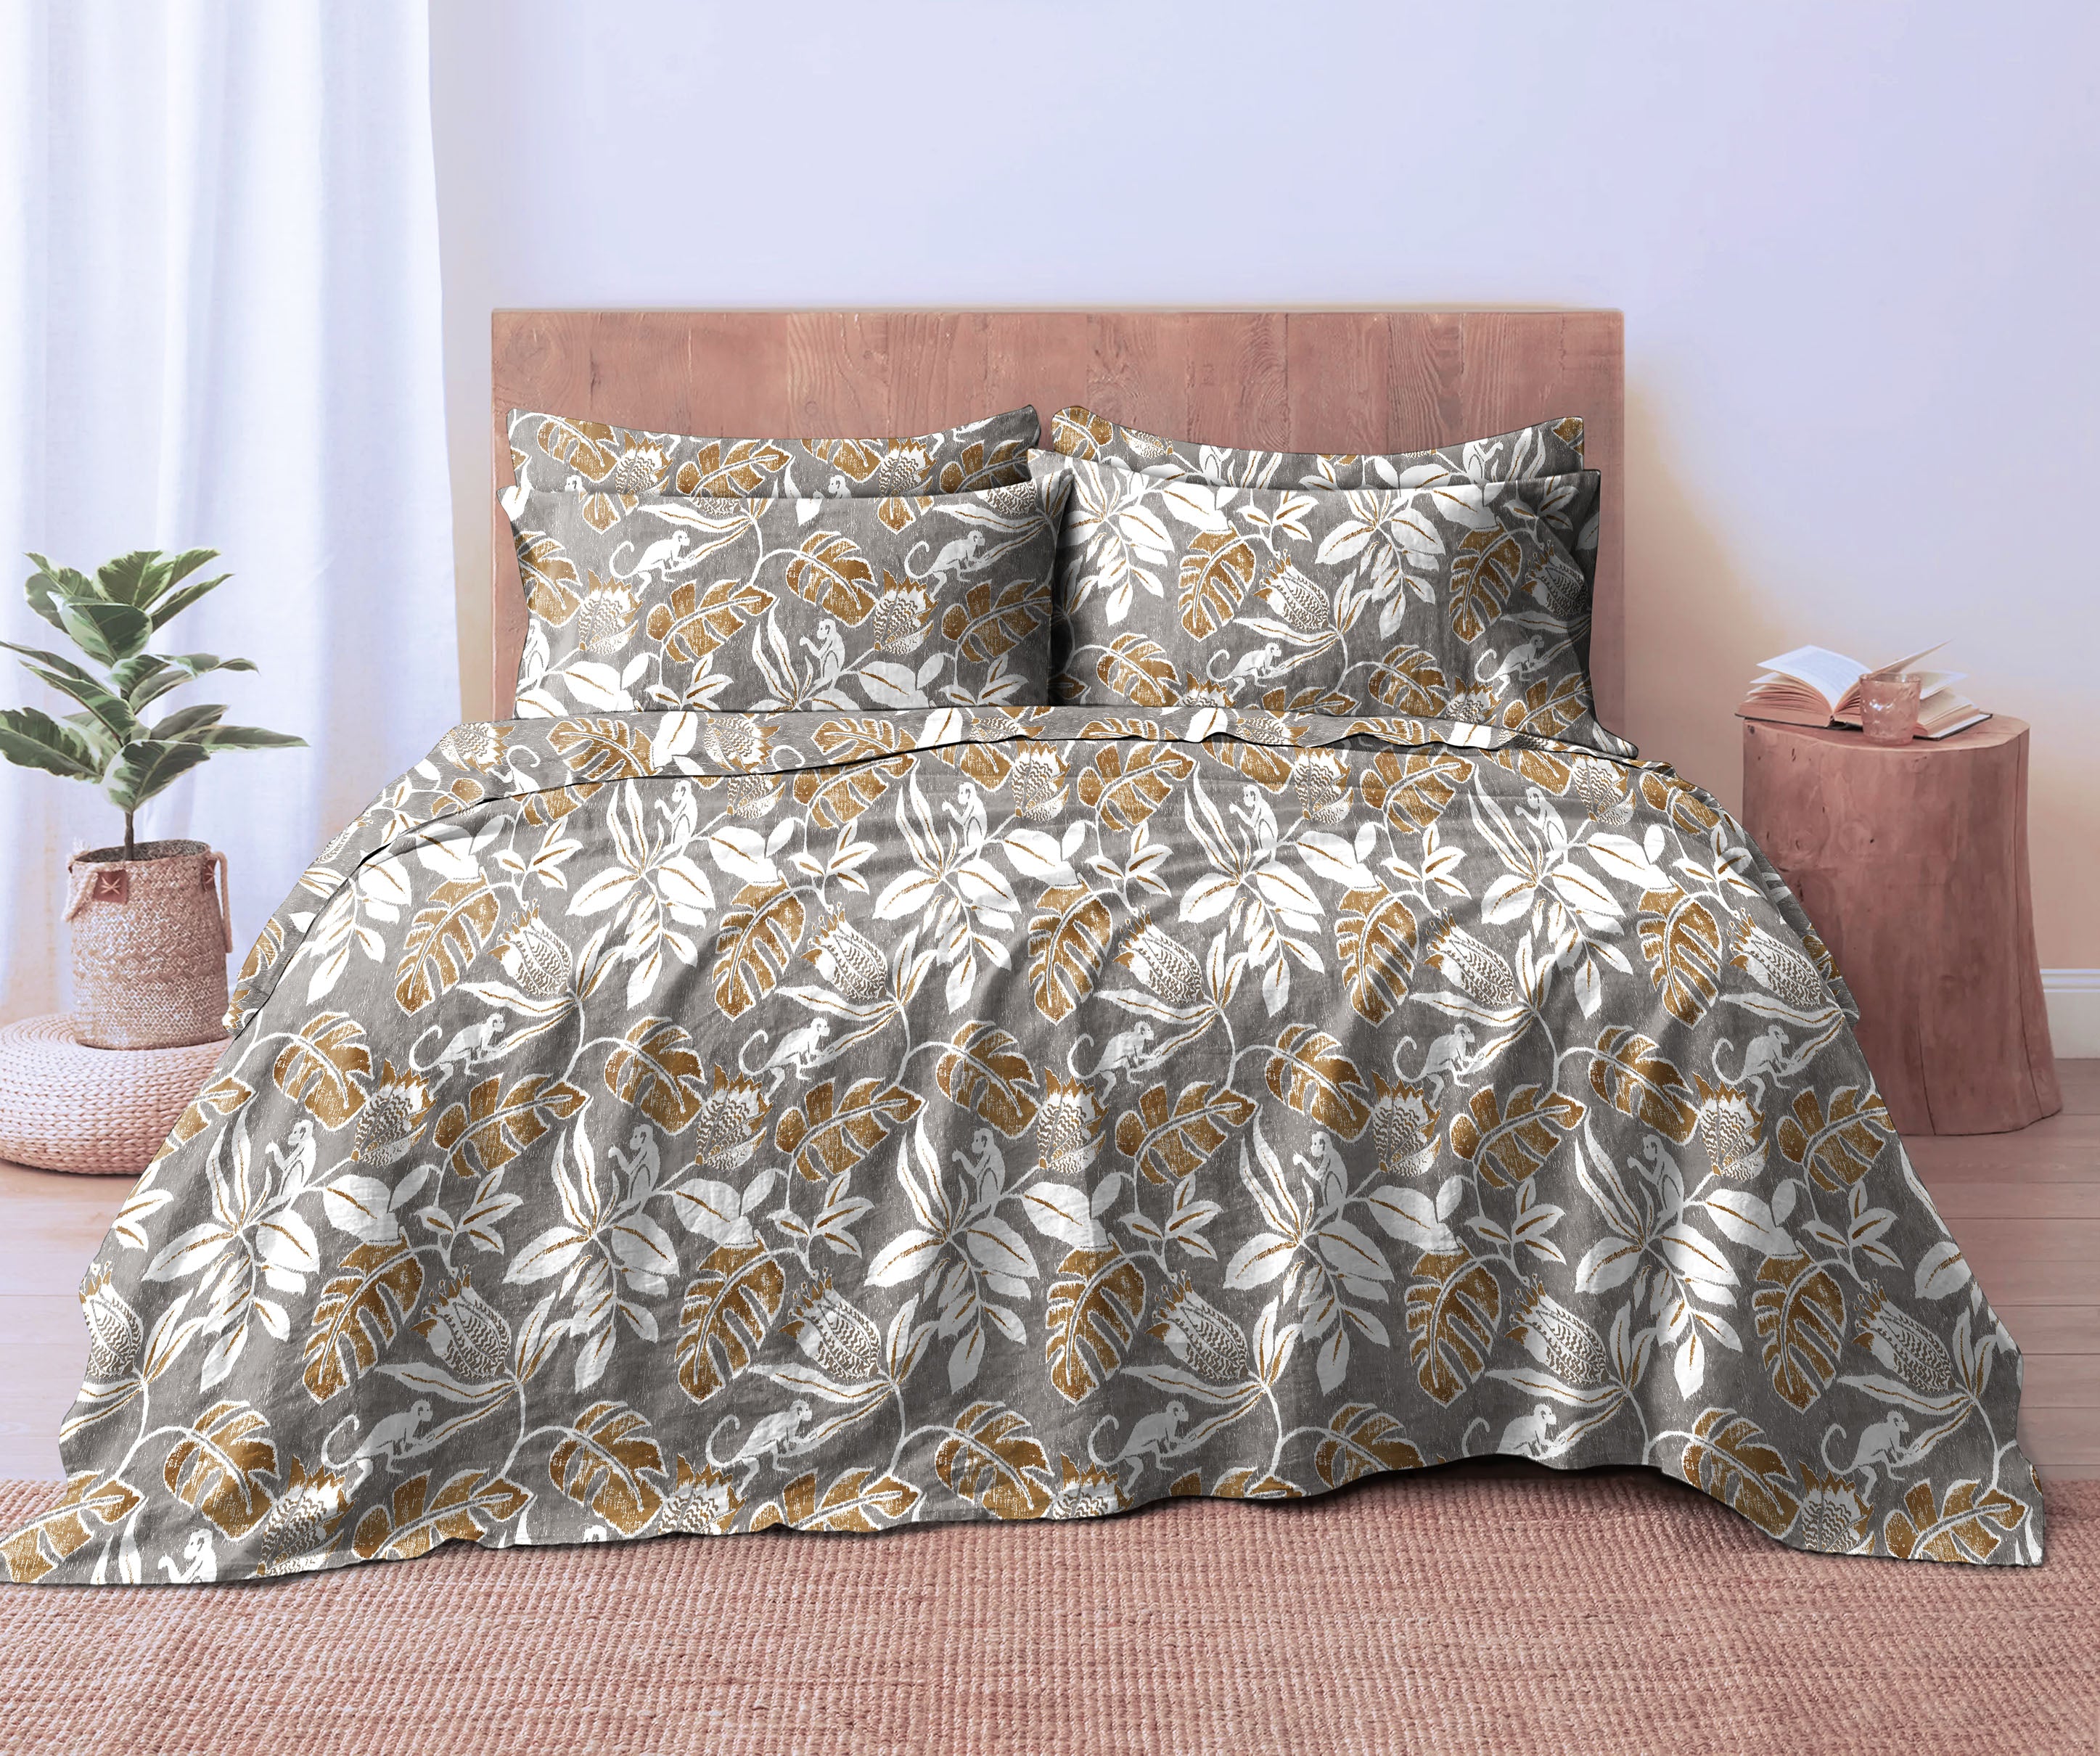 SAVANNA ANTHRACITE BEDCOVER FOR DOUBLE BED WITH 2 PILLOWCOVERS KING SIZE (104" X 90")